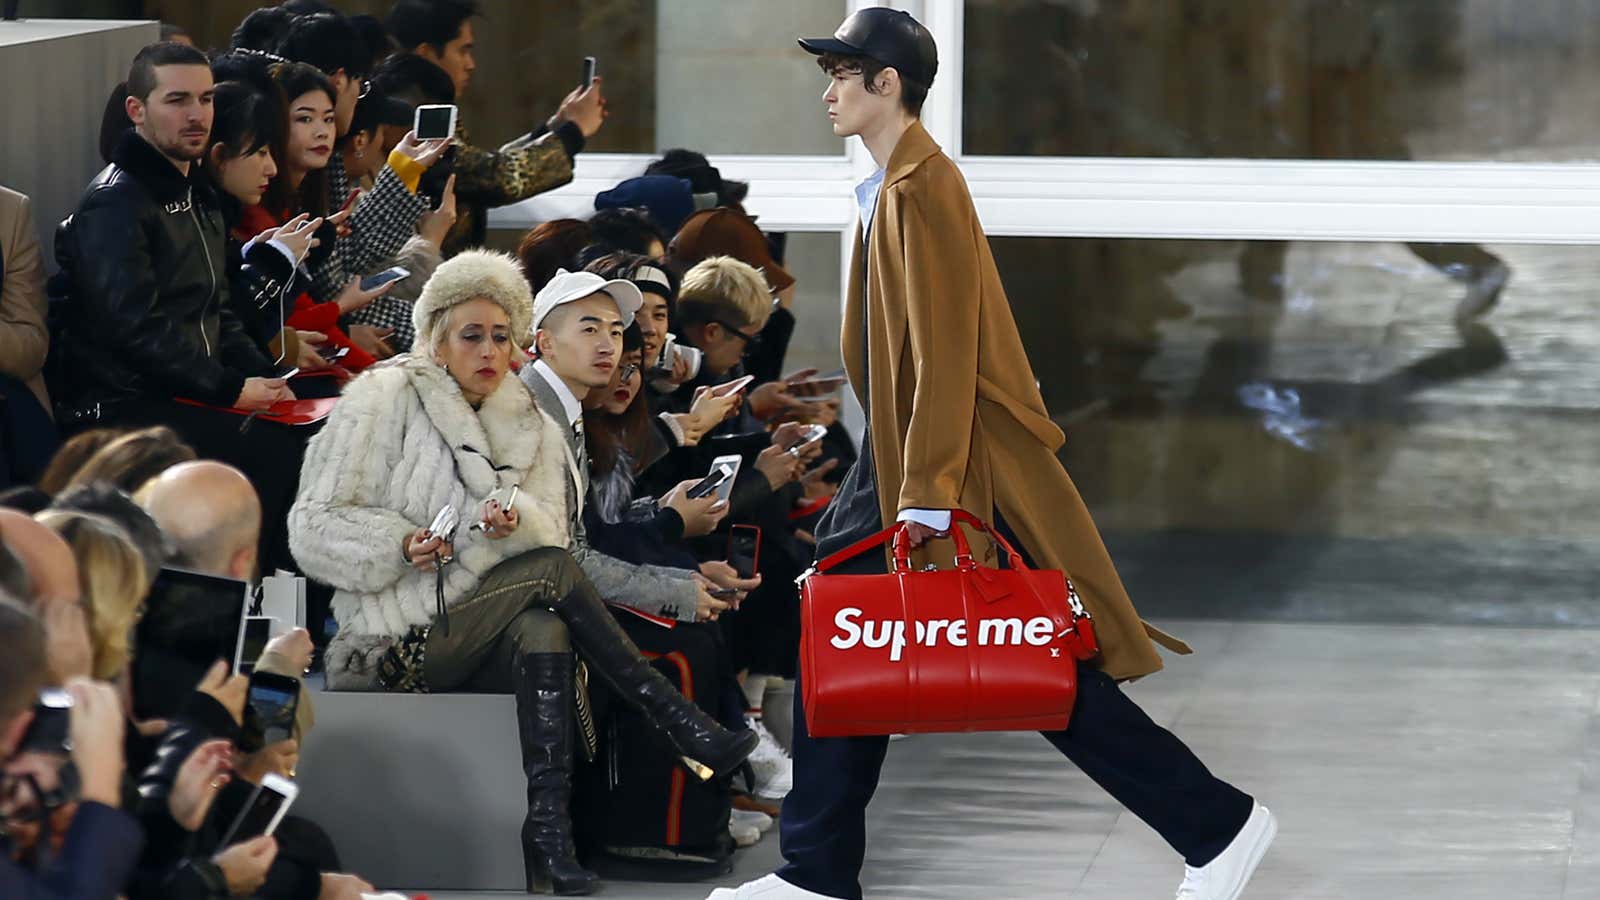 Two for one Louis Vuitton presents collaboration with skater label Supreme   Louis Vuitton  The Guardian